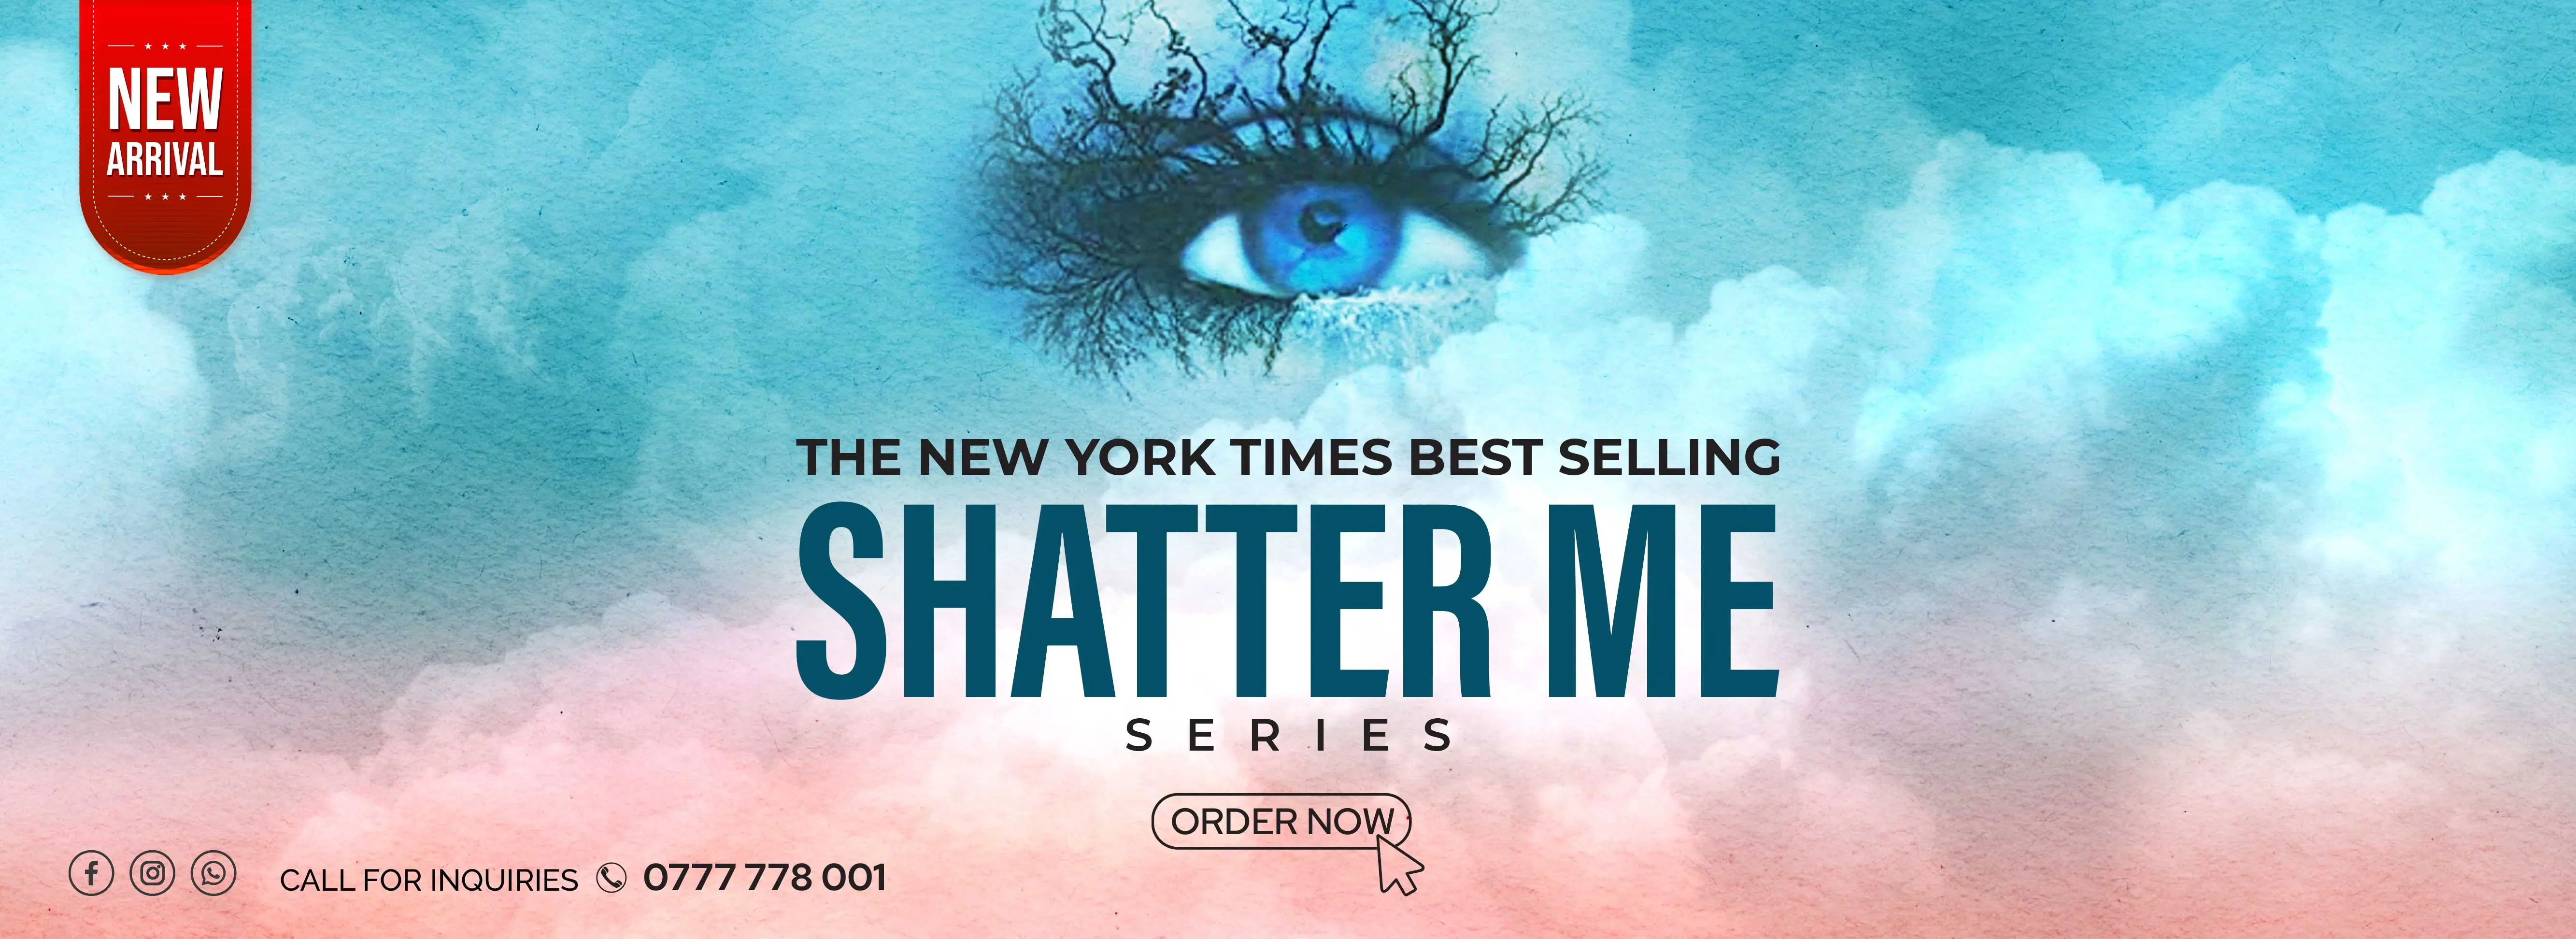 The New York Times Best Selling Shatter Me Series